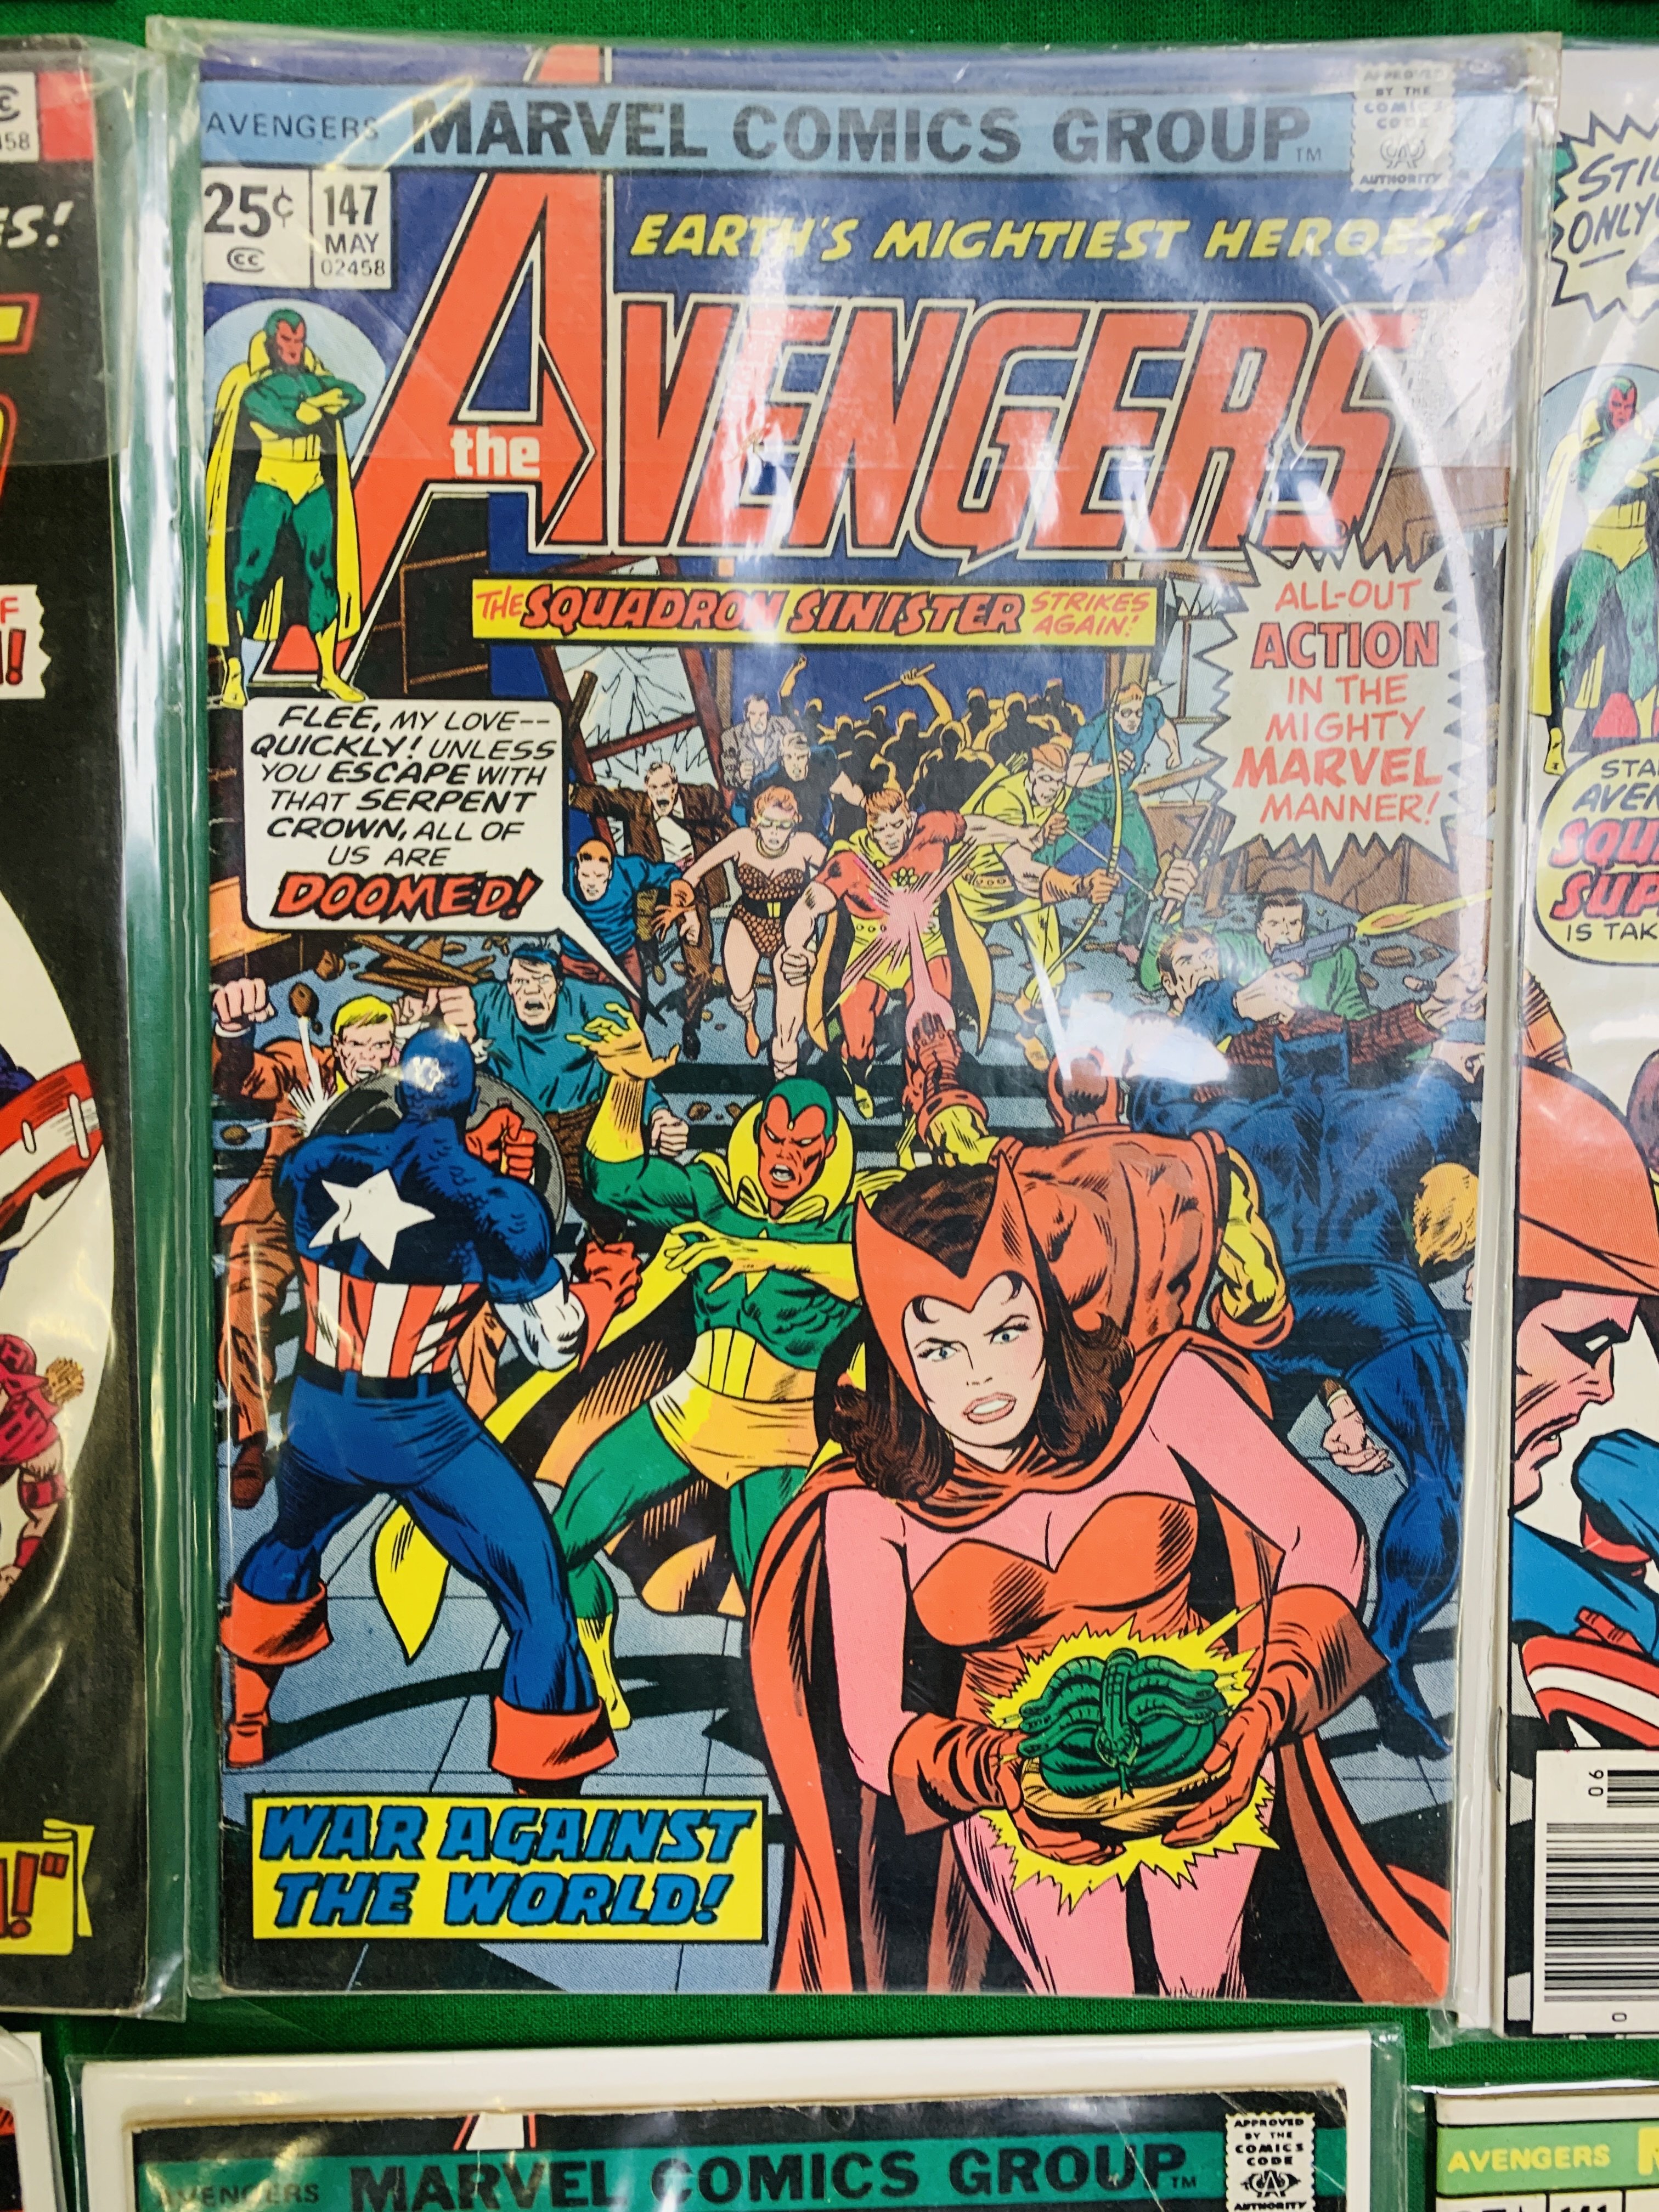 MARVEL COMICS THE AVENGERS NO. 101 - 299, MISSING ISSUES 103 AND 110. - Image 33 of 130